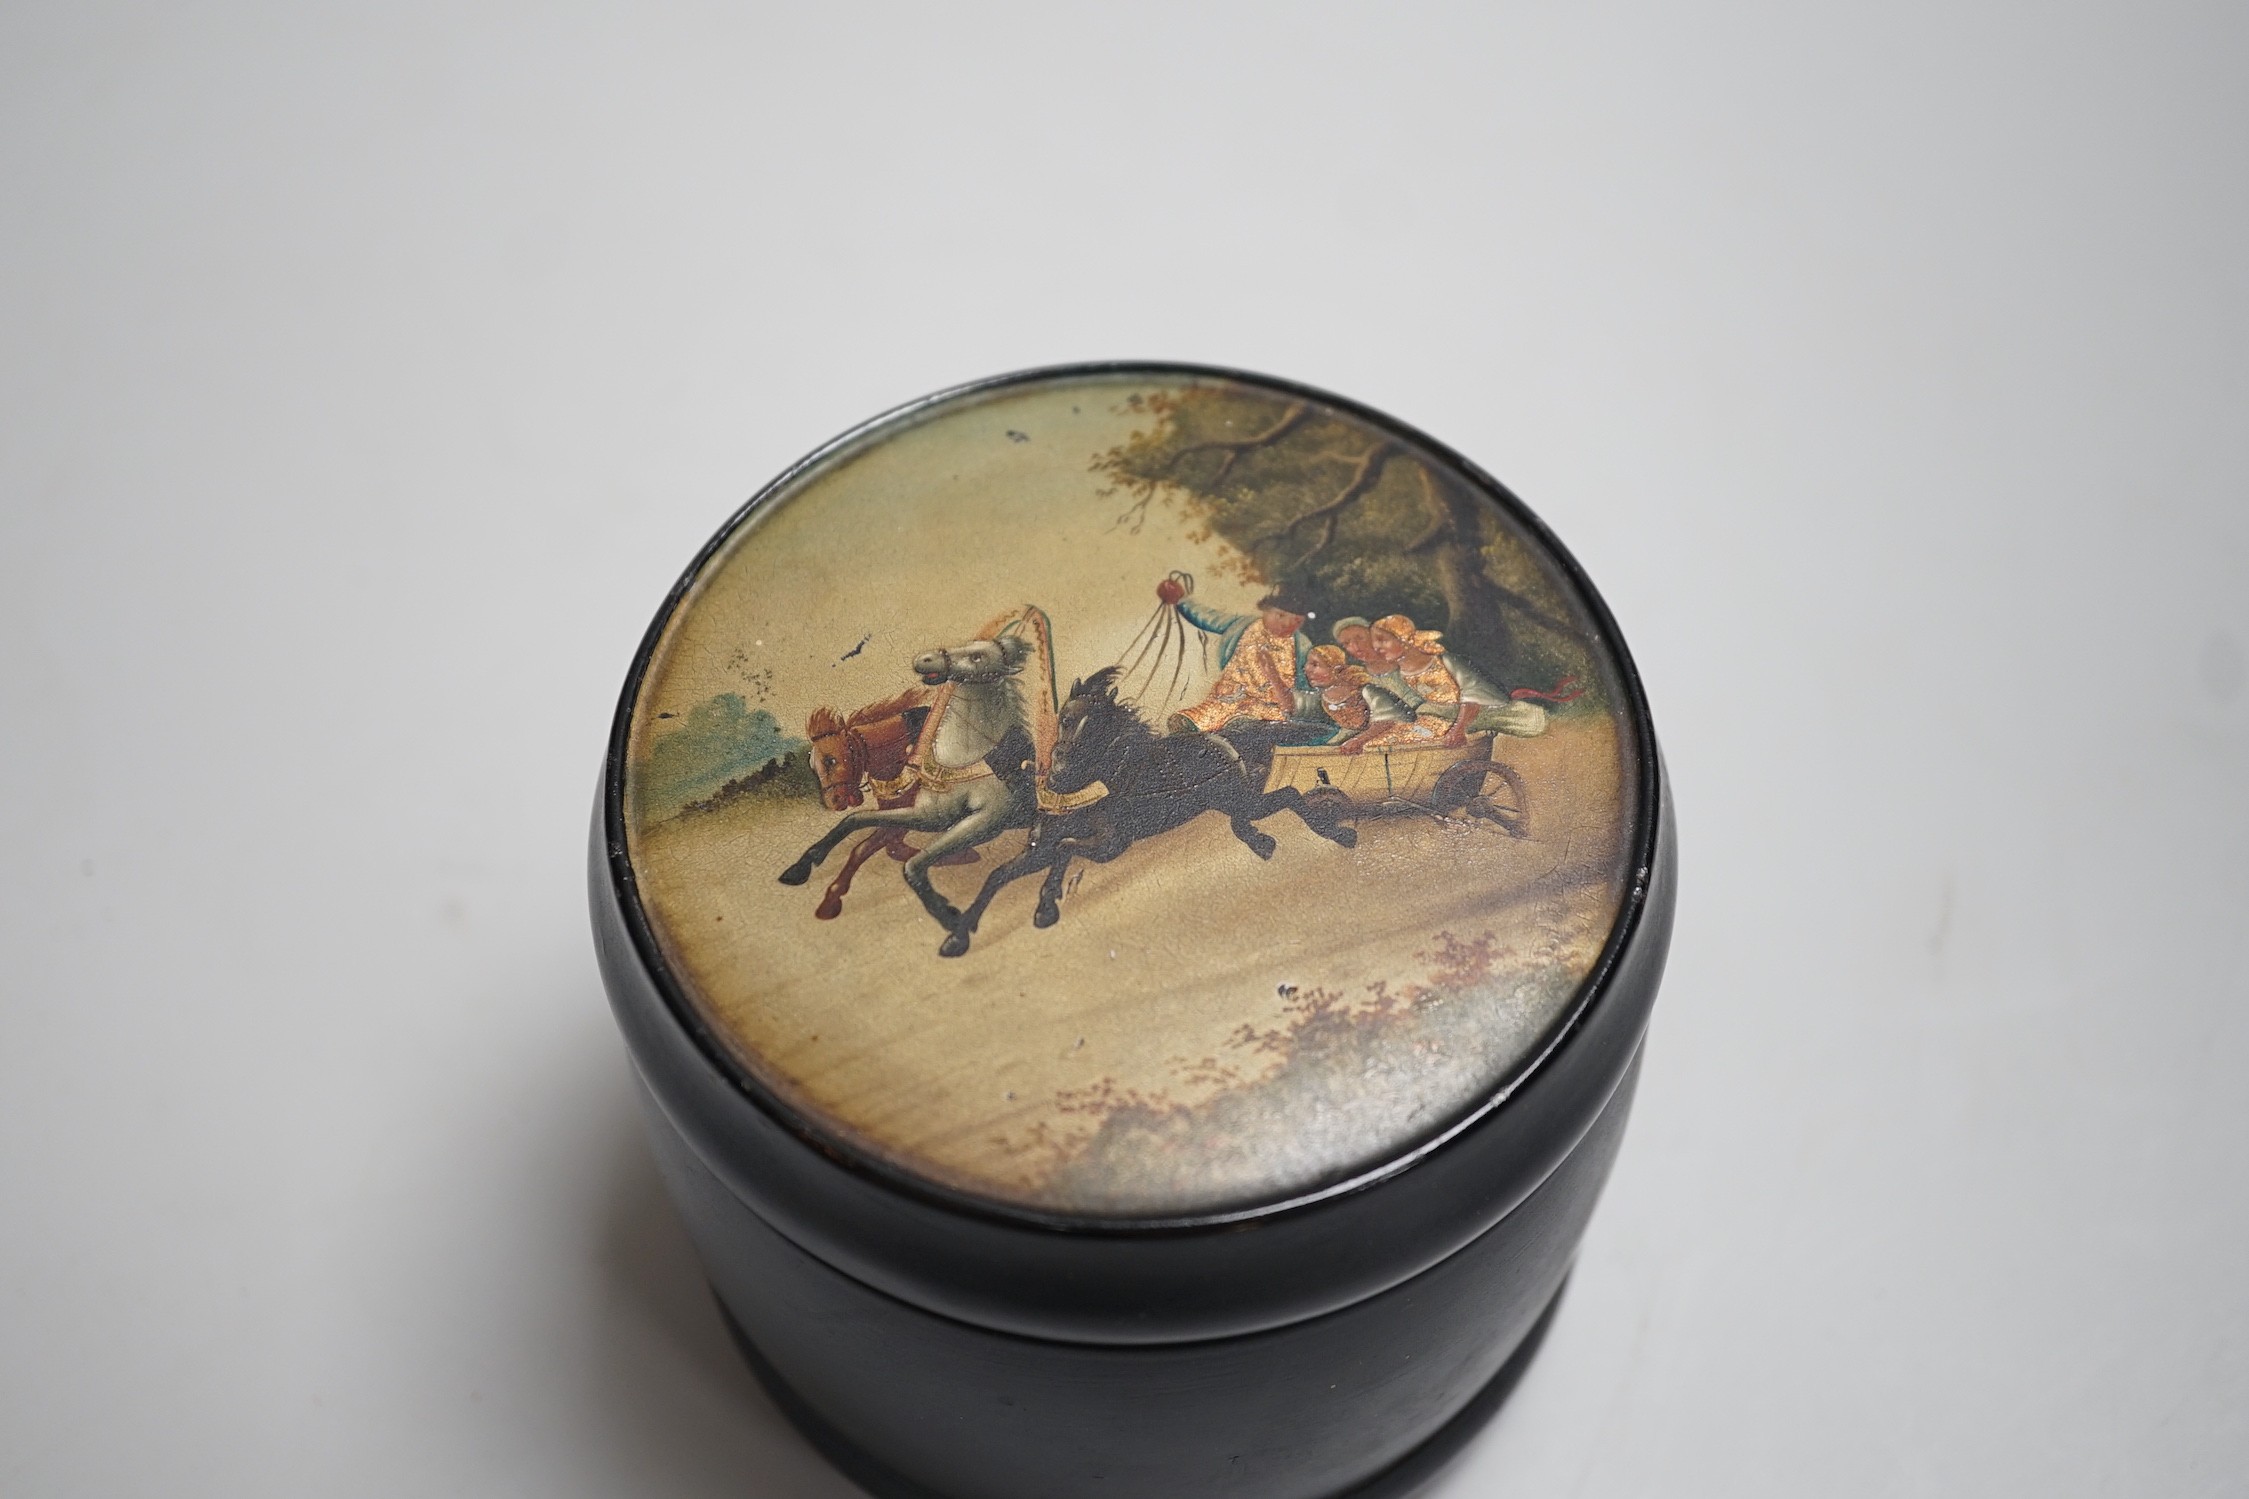 An early 20th century Russian lacquer tobacco box, the cover painted with a winter scene with figures in a troika. 9.5cm high